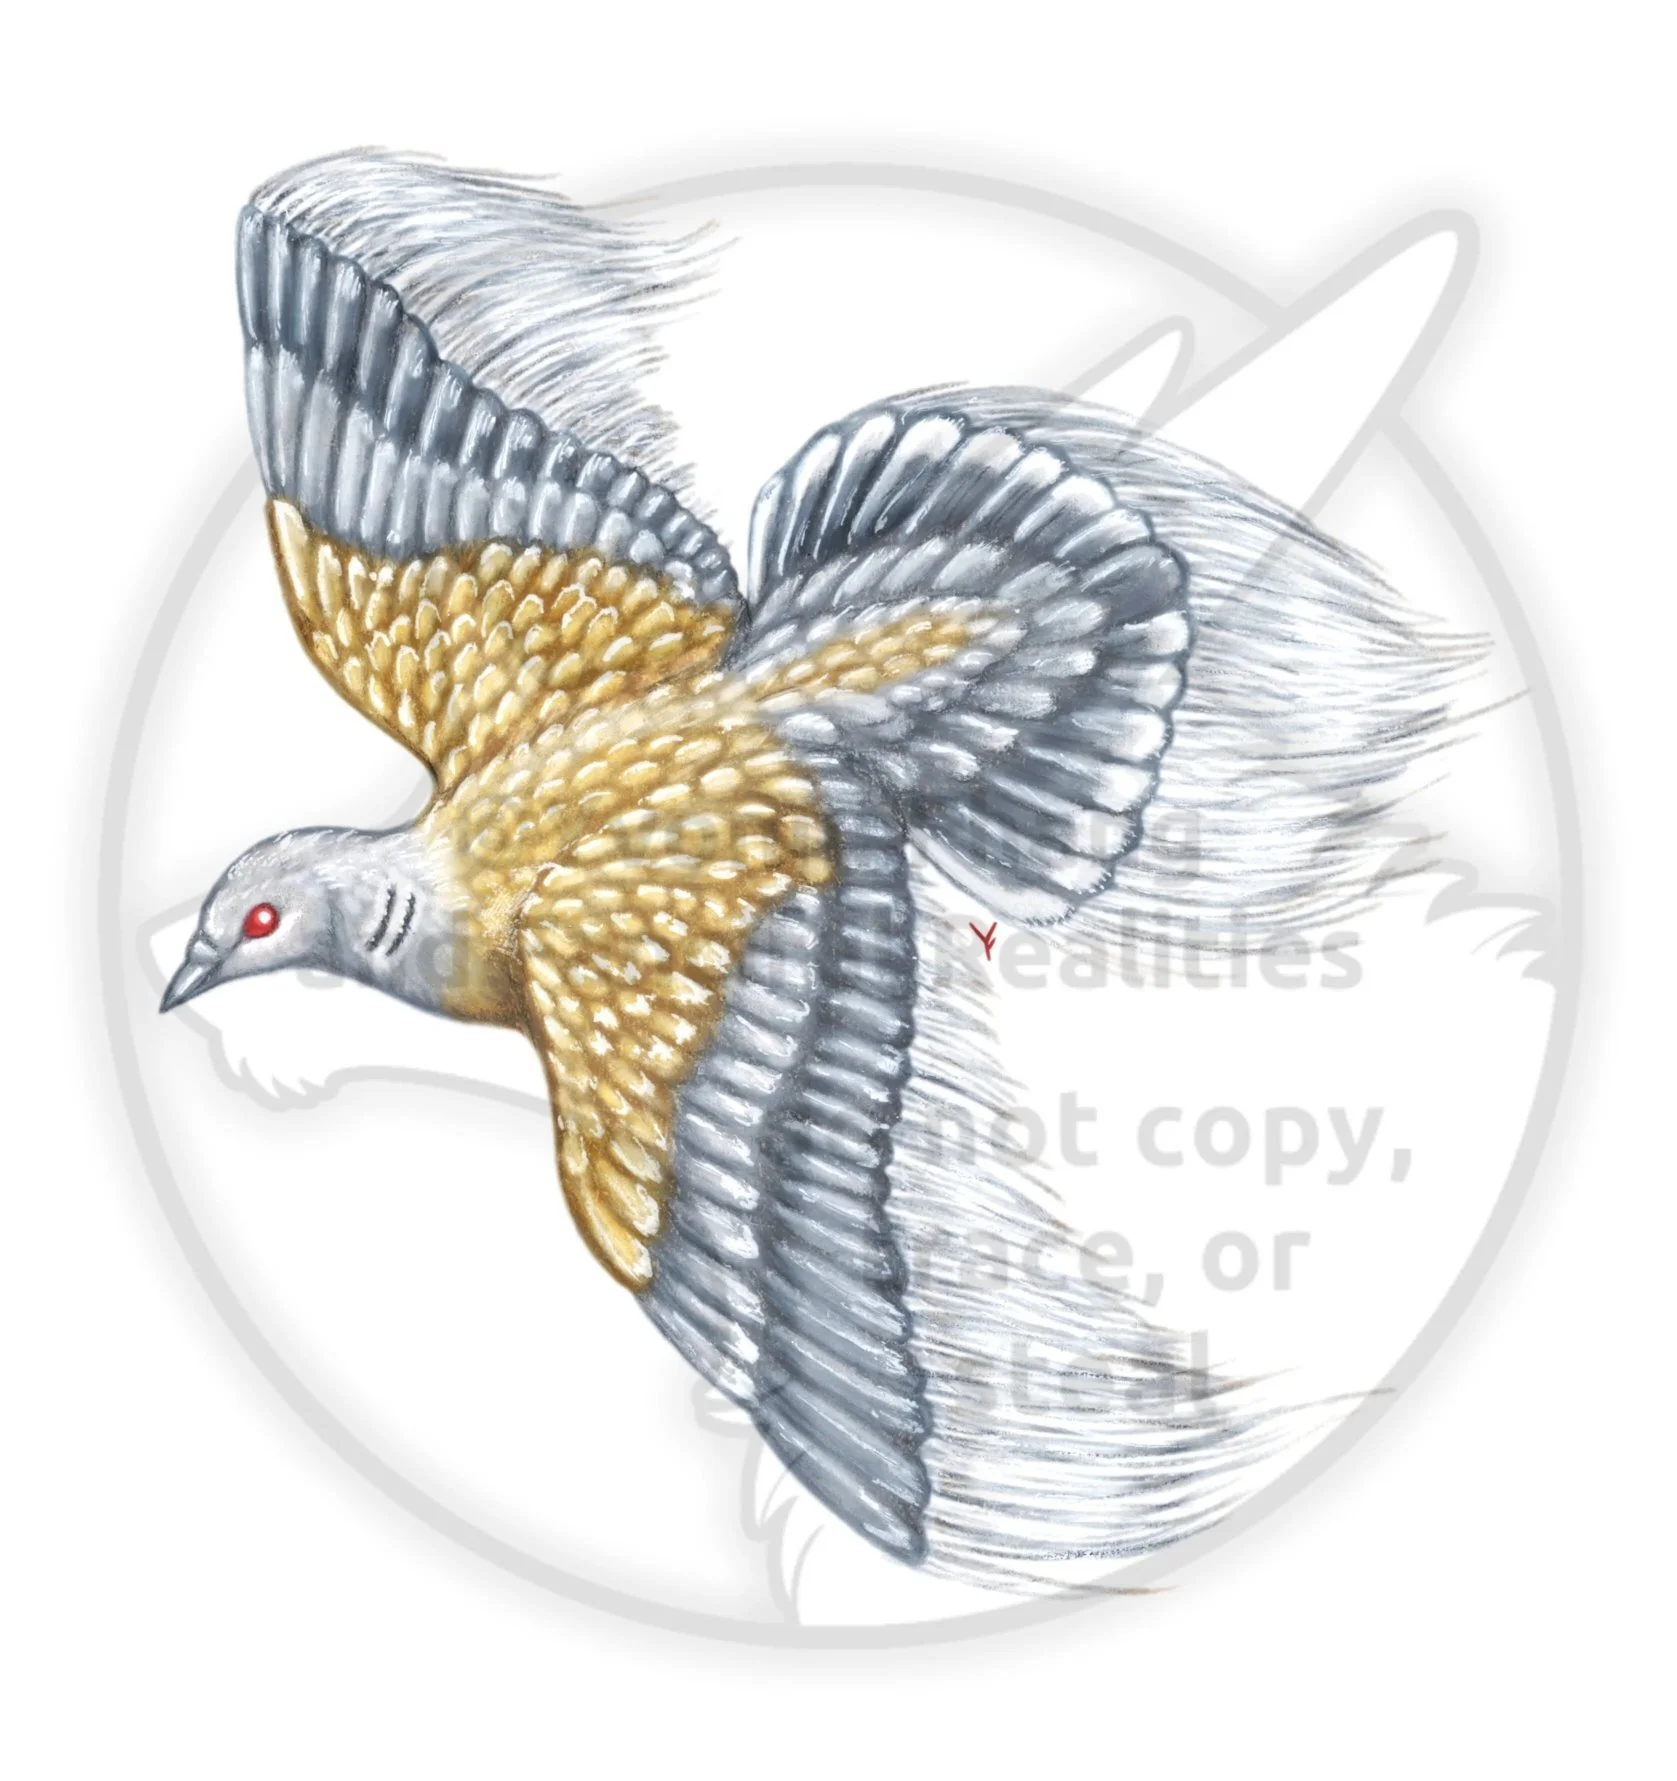 An elegant turtledove laced with festive silver holiday tinsel.